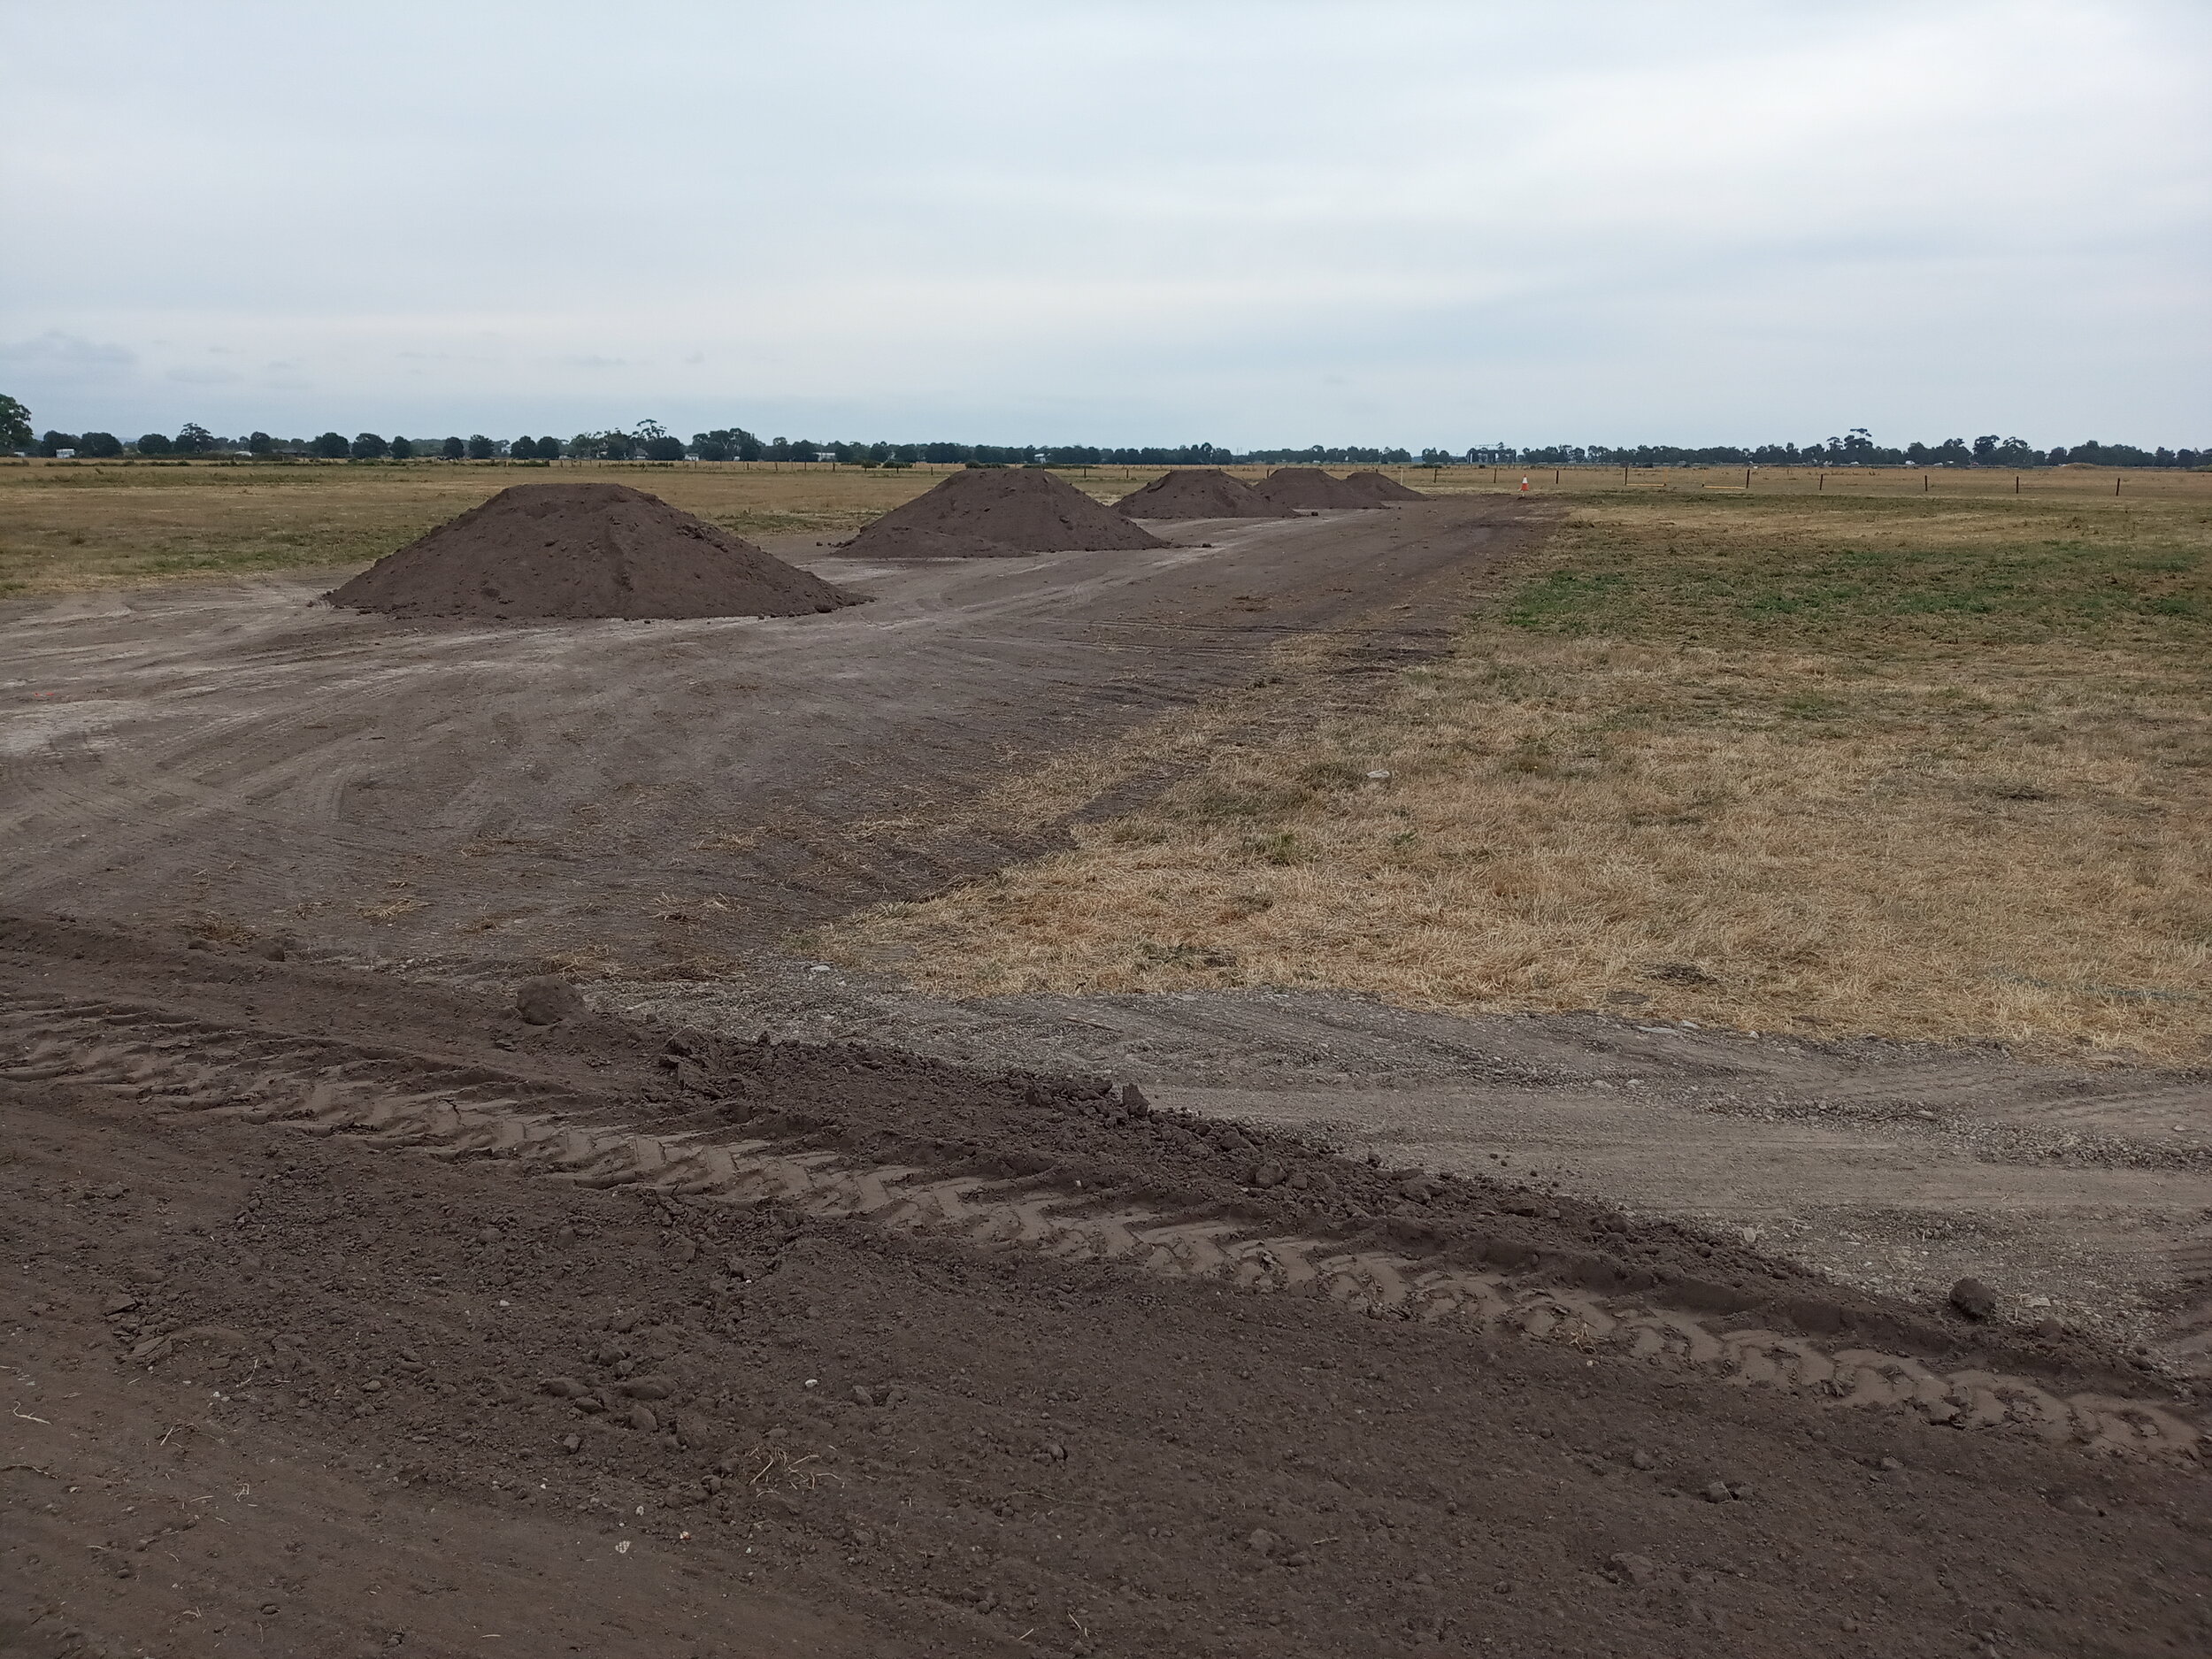  27/2  More topsoil to be spread over the EW runway at the west end 